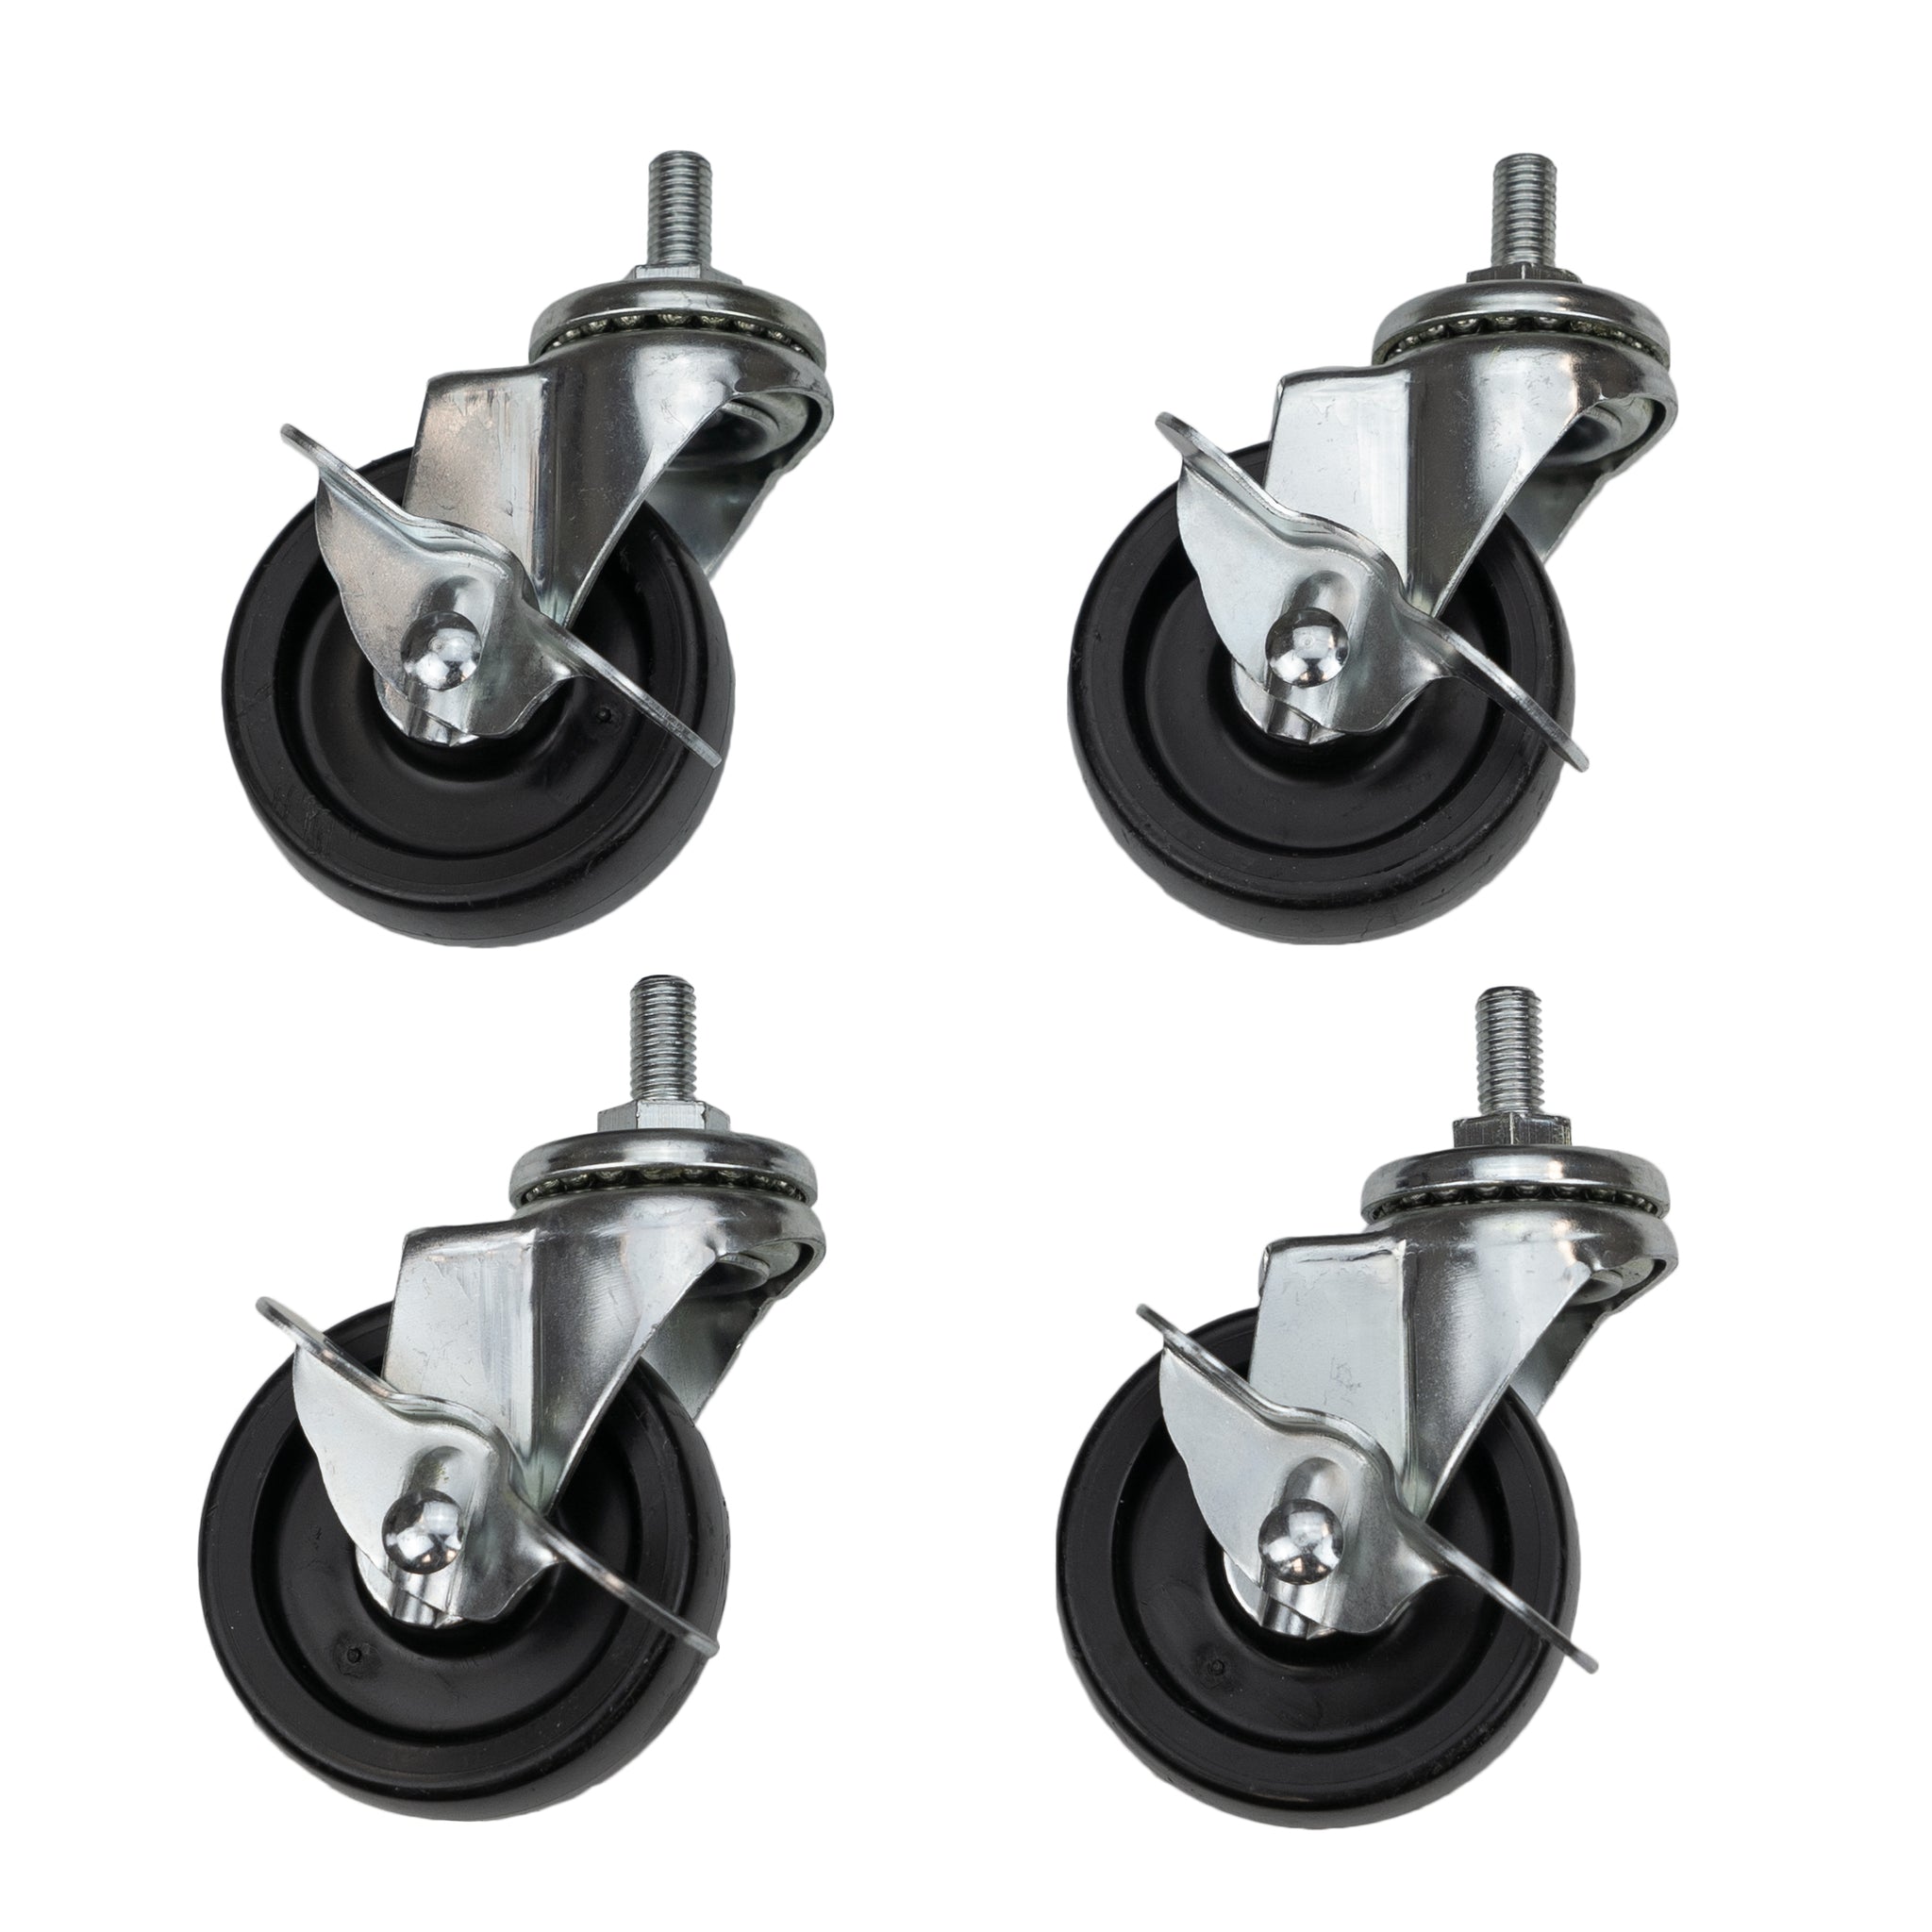 Casters (Set of 4)